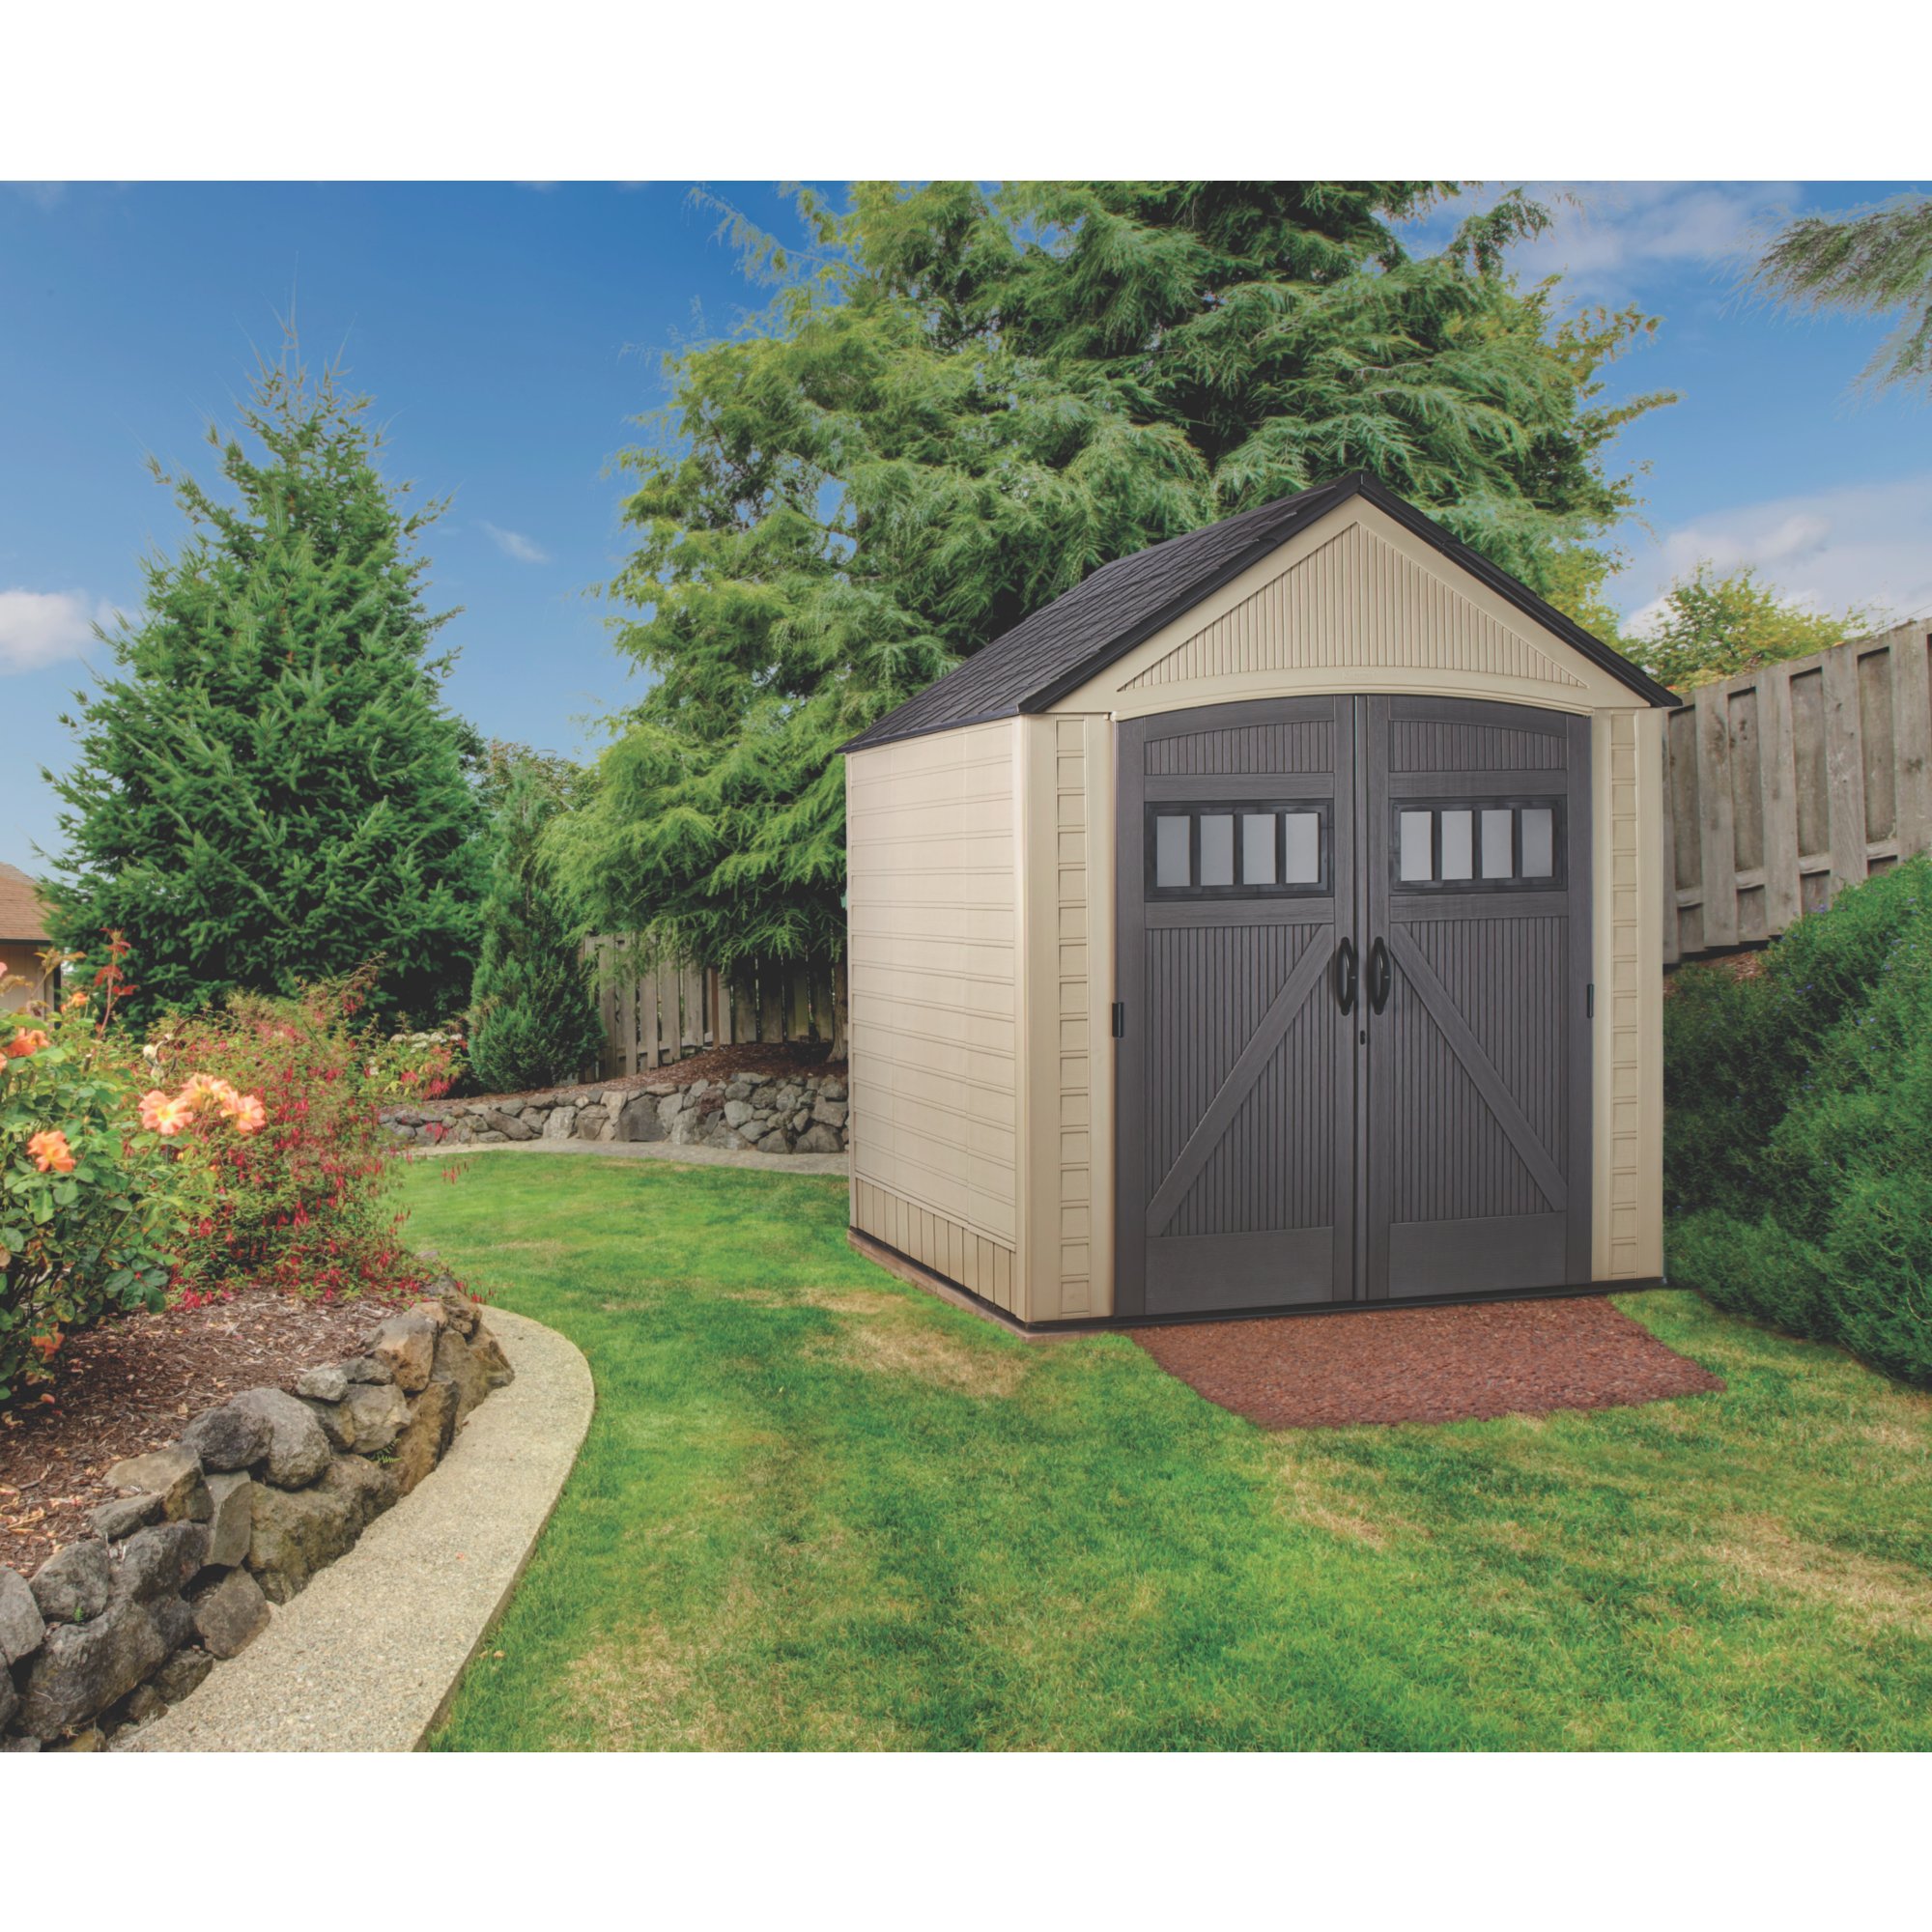 https://s7d9.scene7.com/is/image/NewellRubbermaid/2035893-ccs-outdoor-sheds-7x7-roughneck-faint-maple-backyard-propped-both-doors-open-angle-lifestyle-2?wid=2000&hei=2000